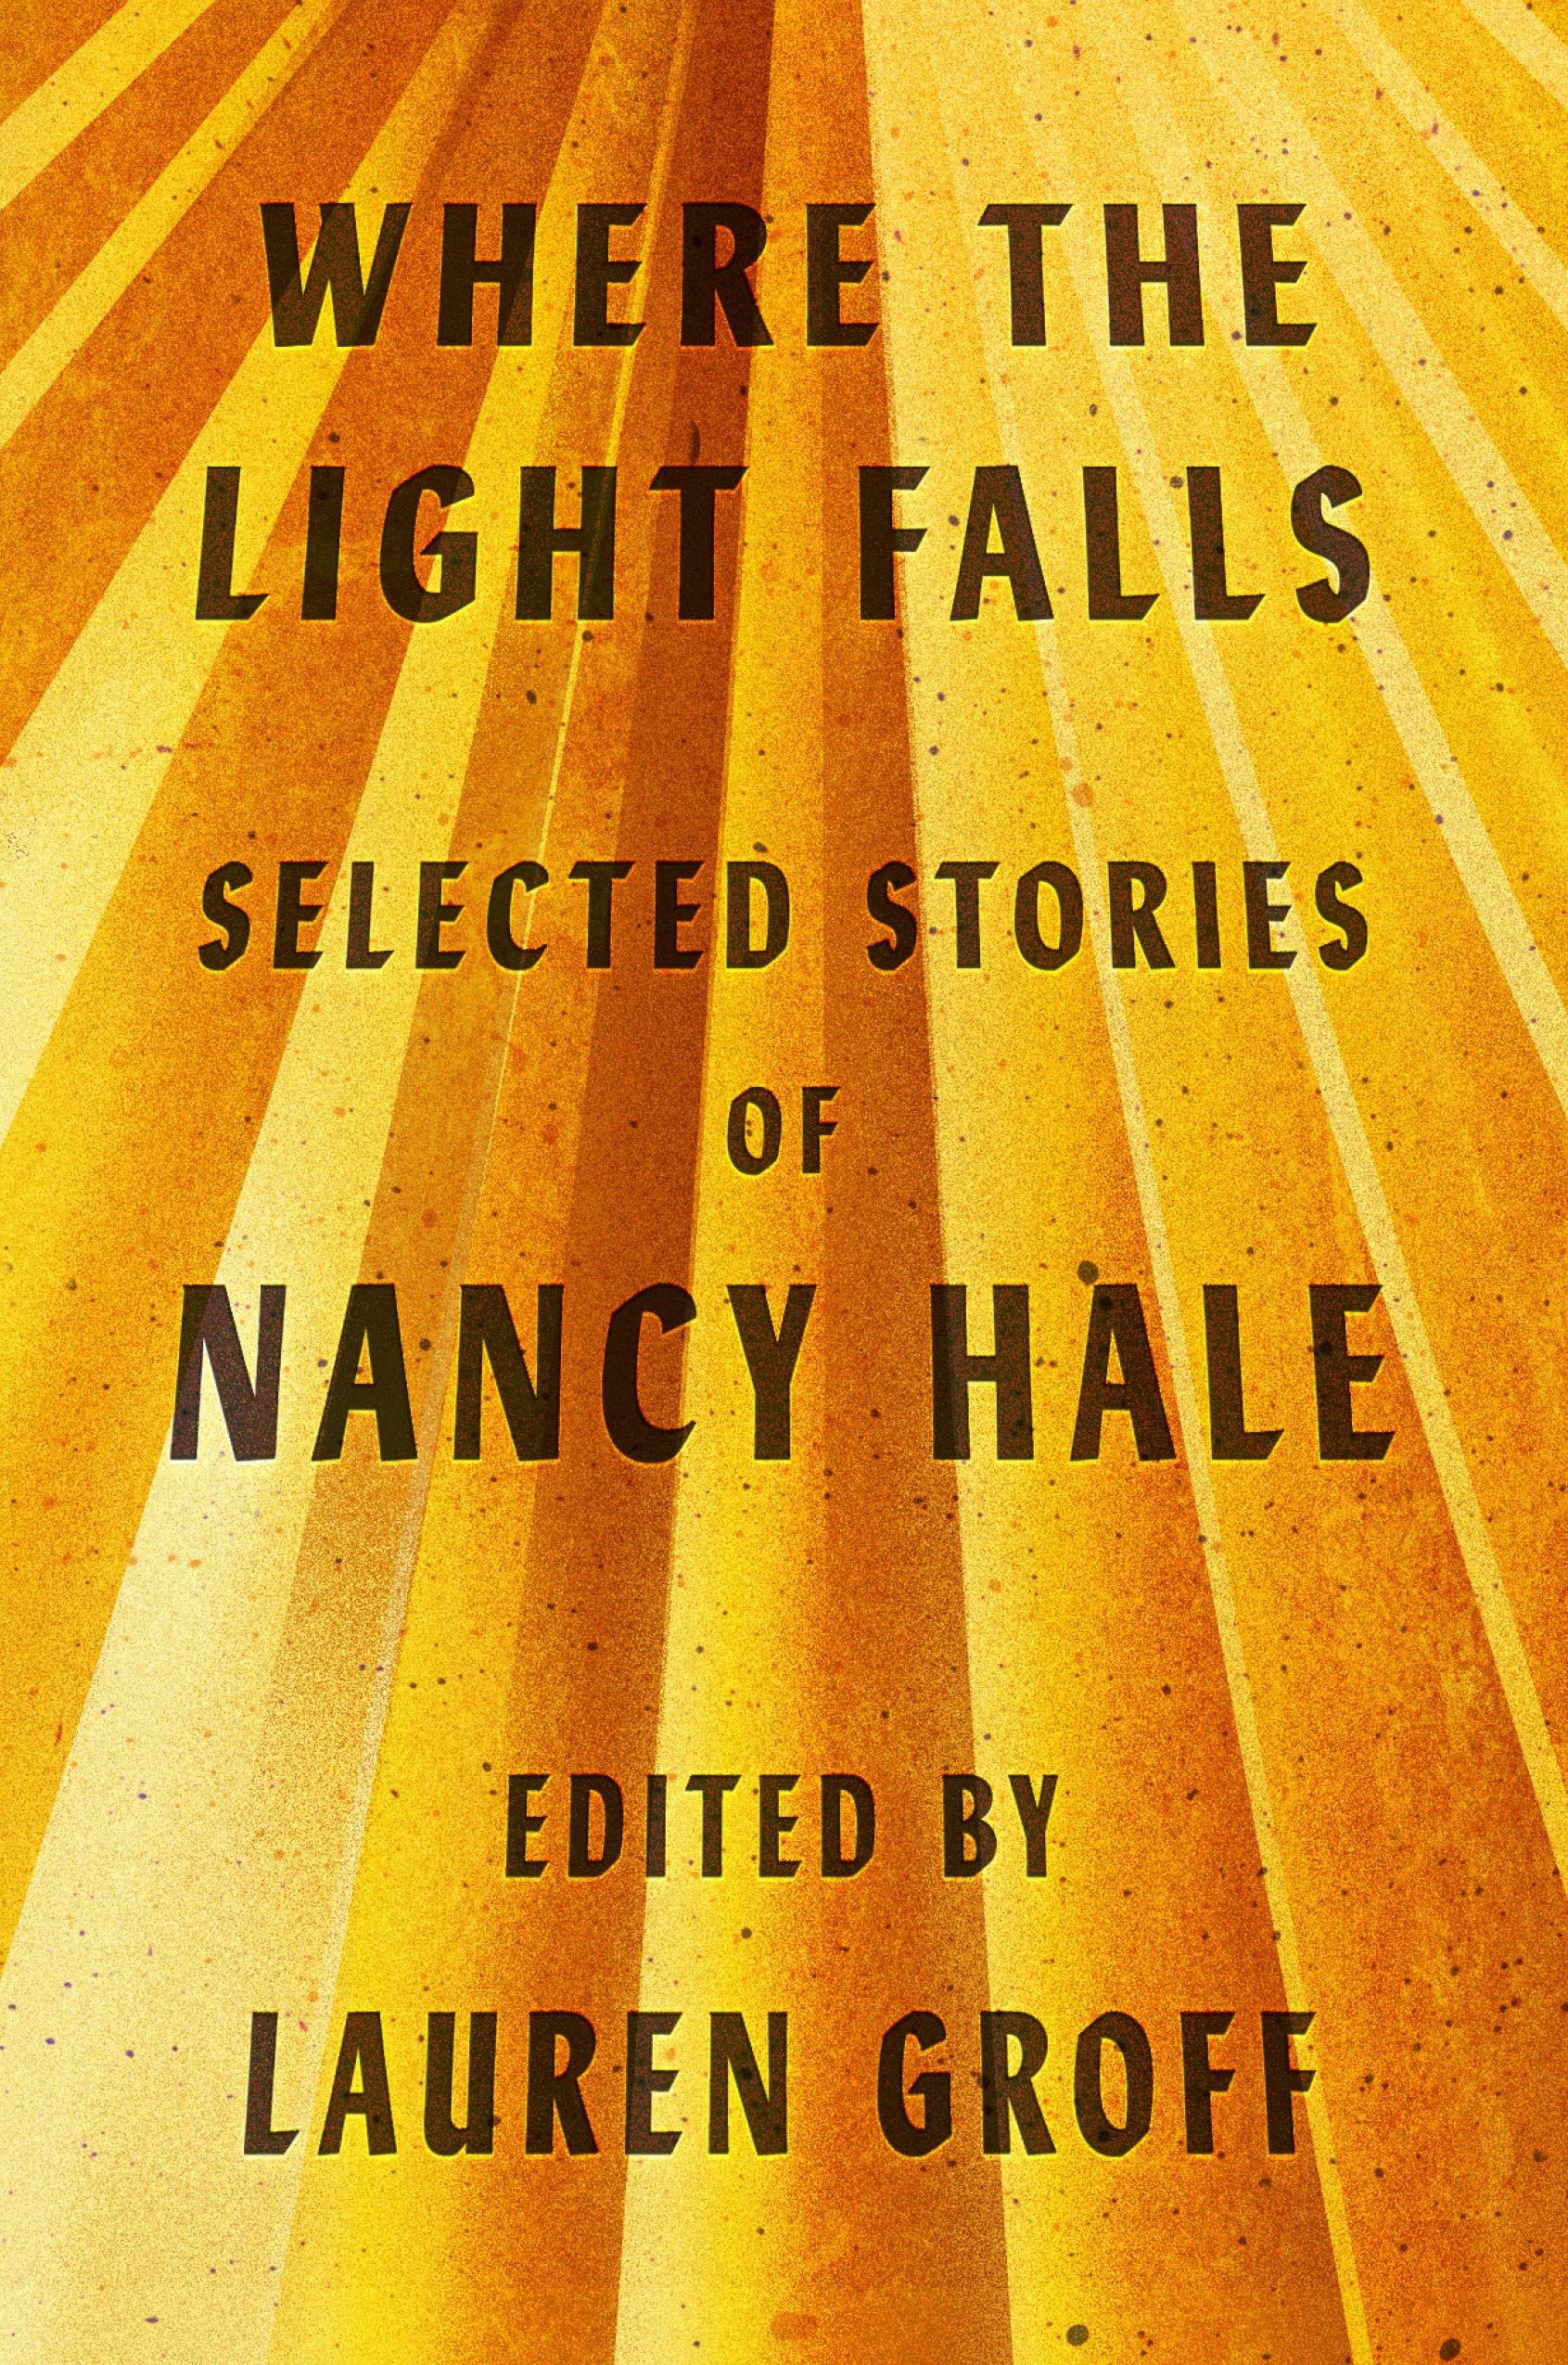 The cover of Where the Light Falls: Selected Stories of Nancy Hale